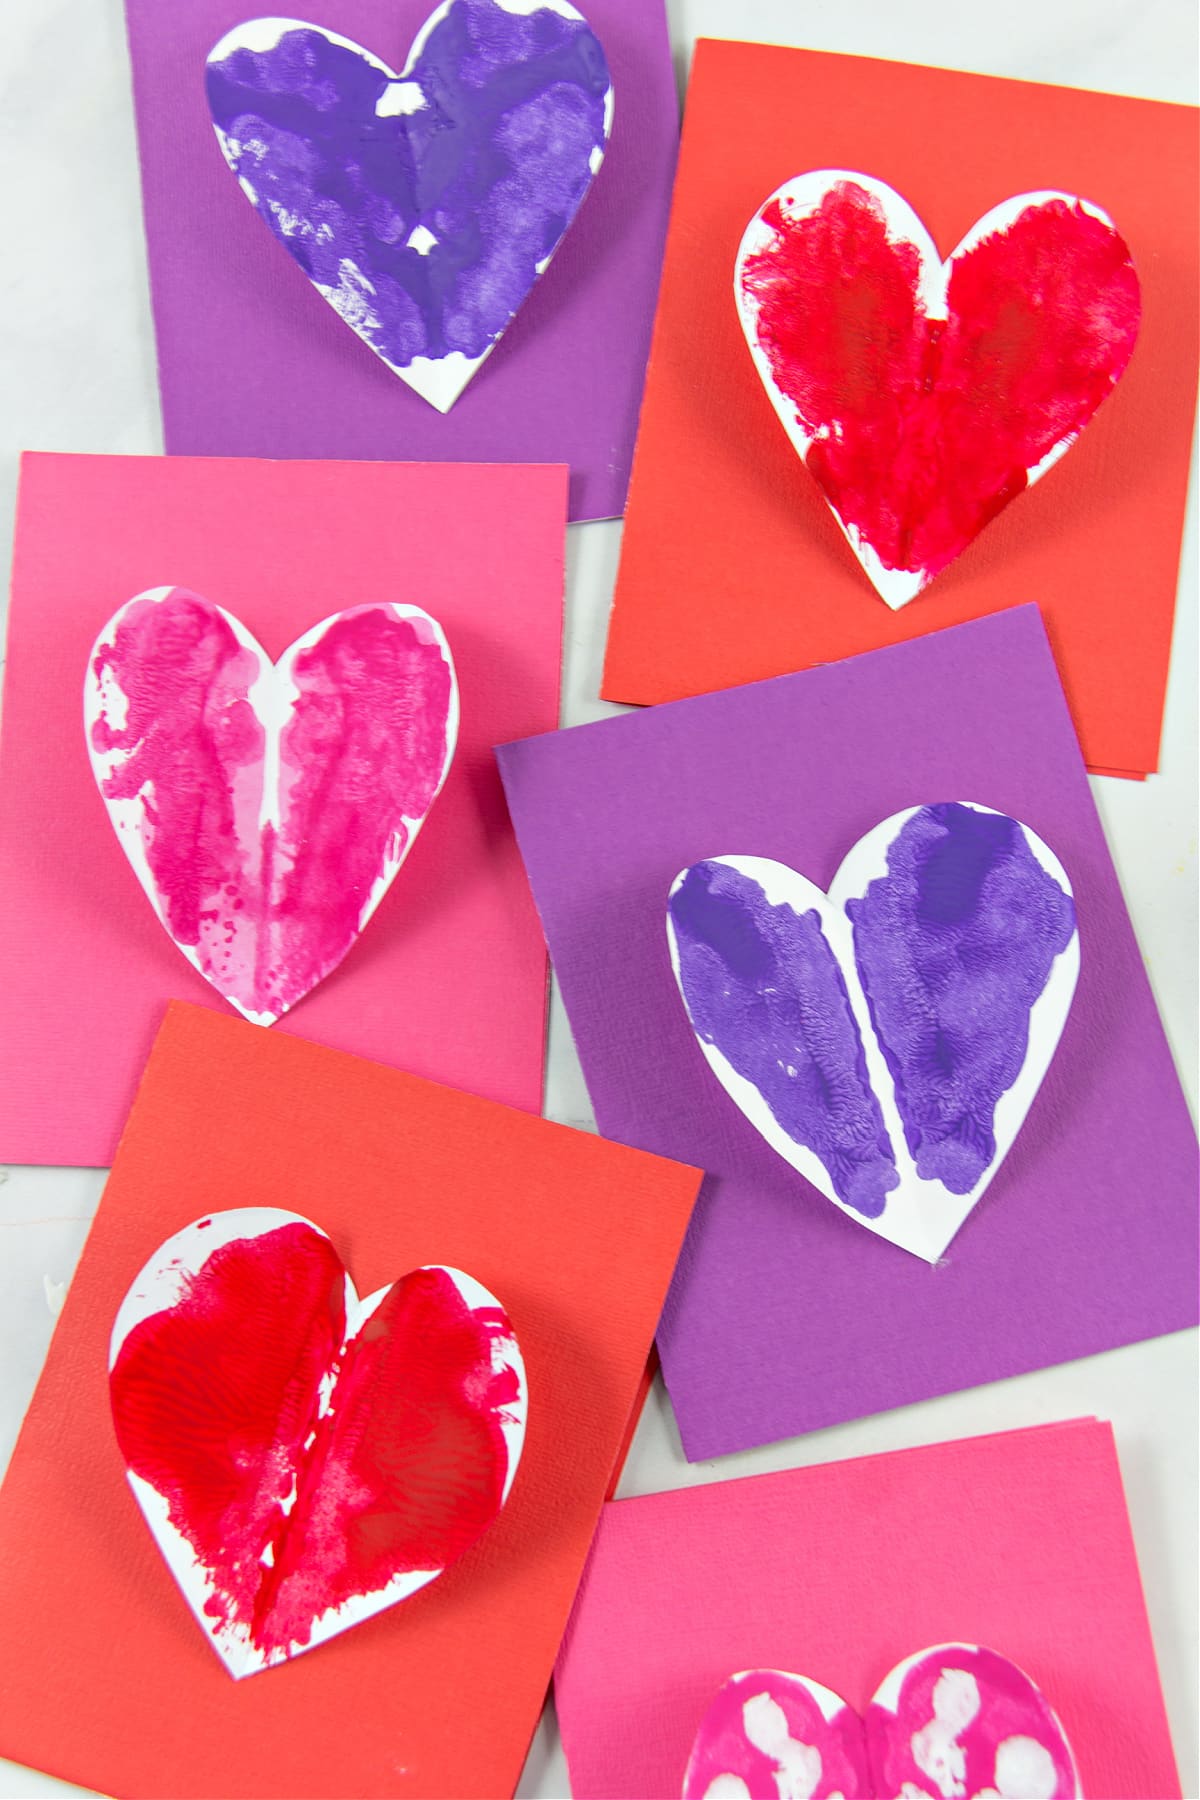 Painted hearts attached to construction paper cards for Valentine's Day